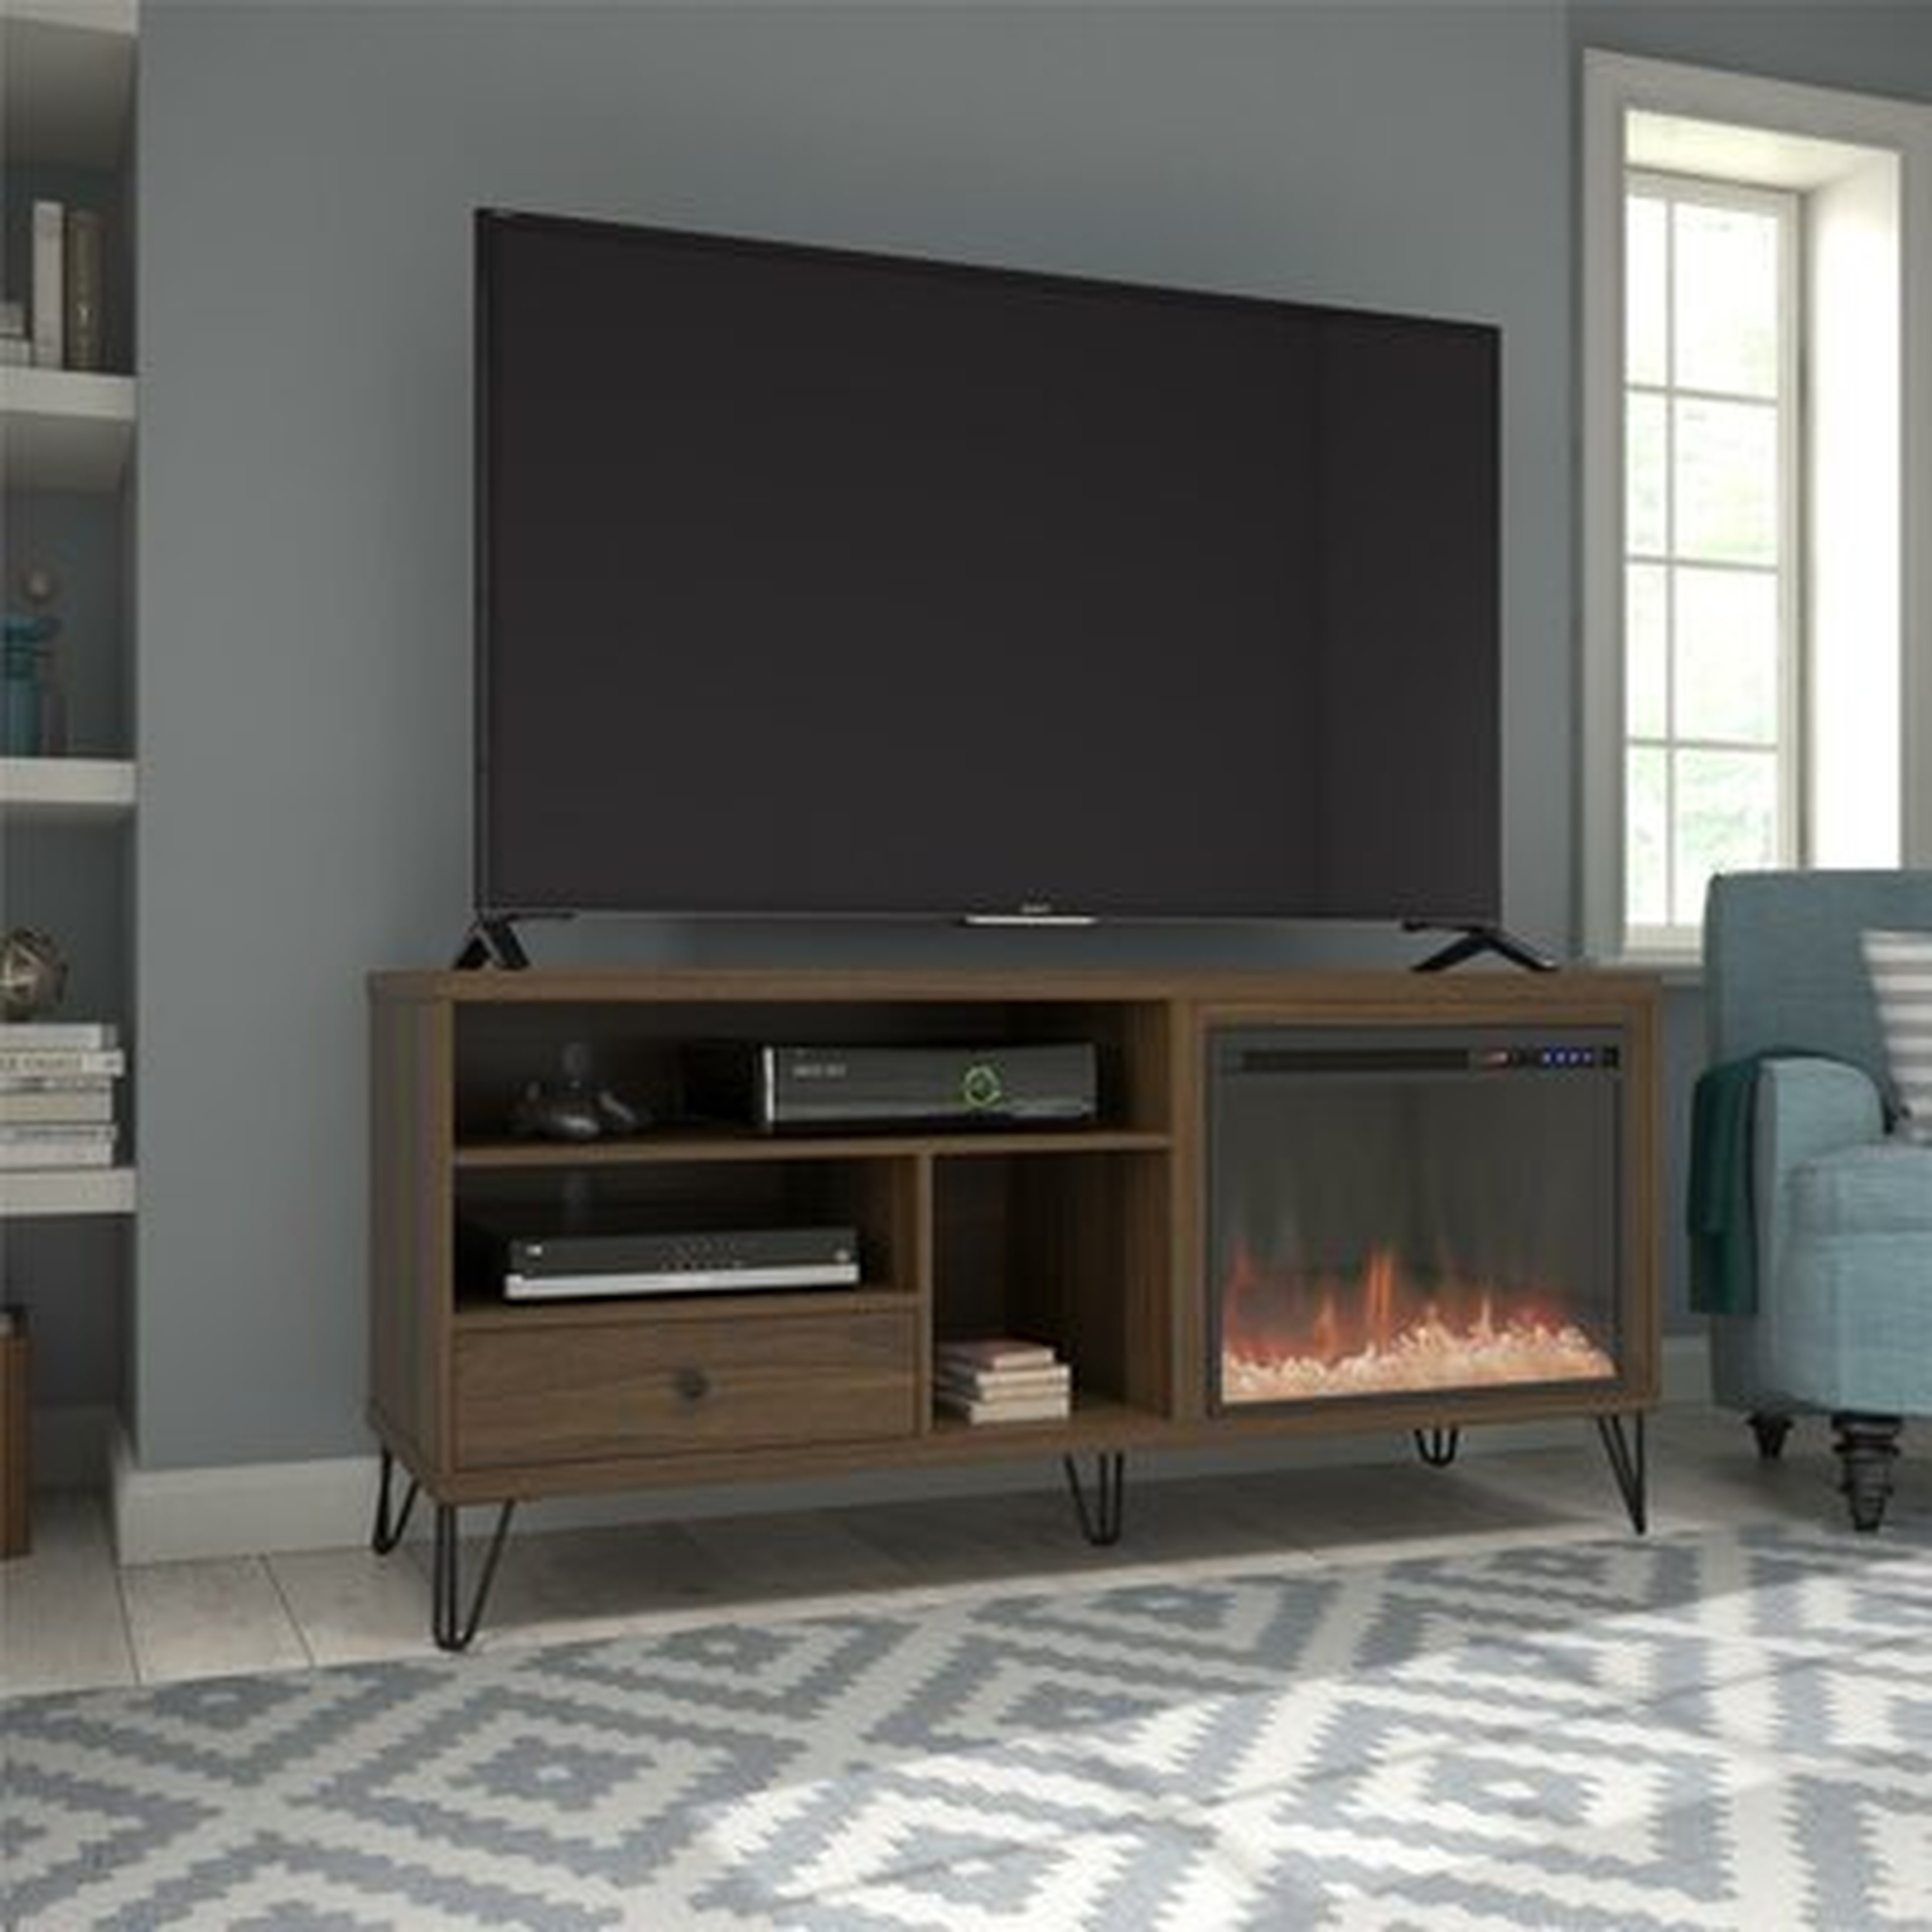 Forest Park TV Stand for TVs up to 65 inches with Electric Fireplace Included - Wayfair